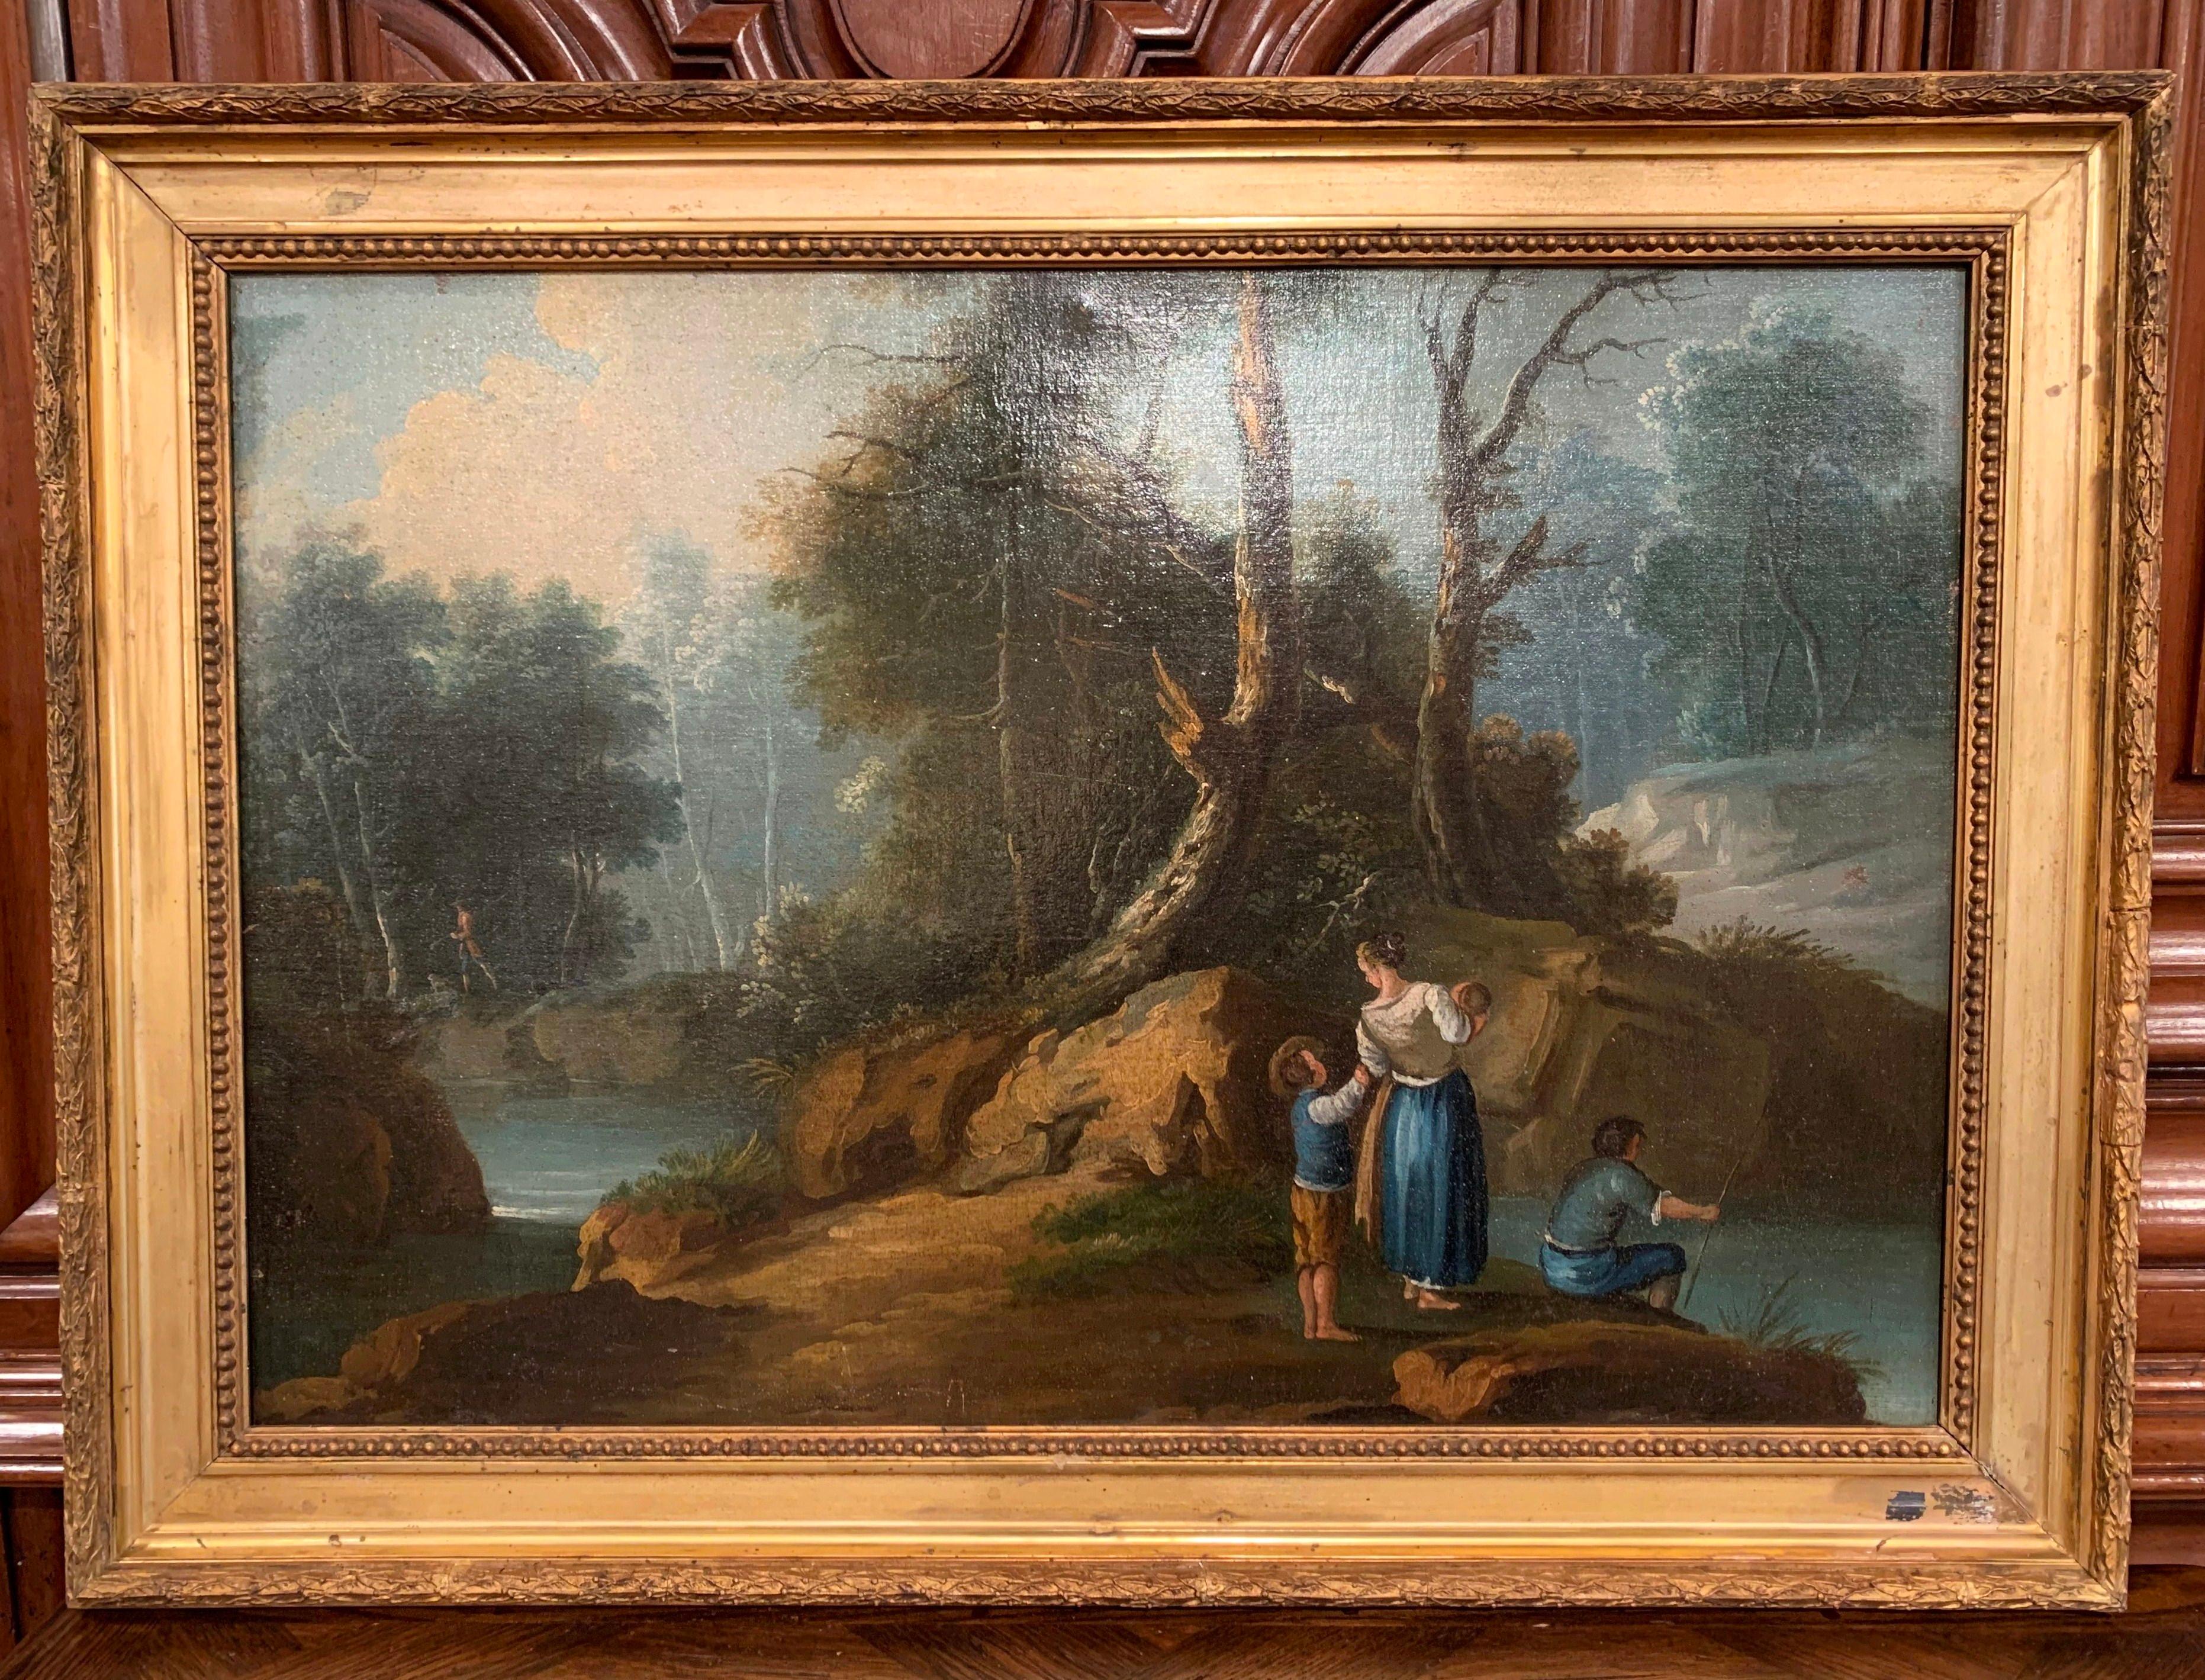 Hand-Carved Mid-19th Century French Oil on Canvas Pastoral Painting in Carved Gilt Frame